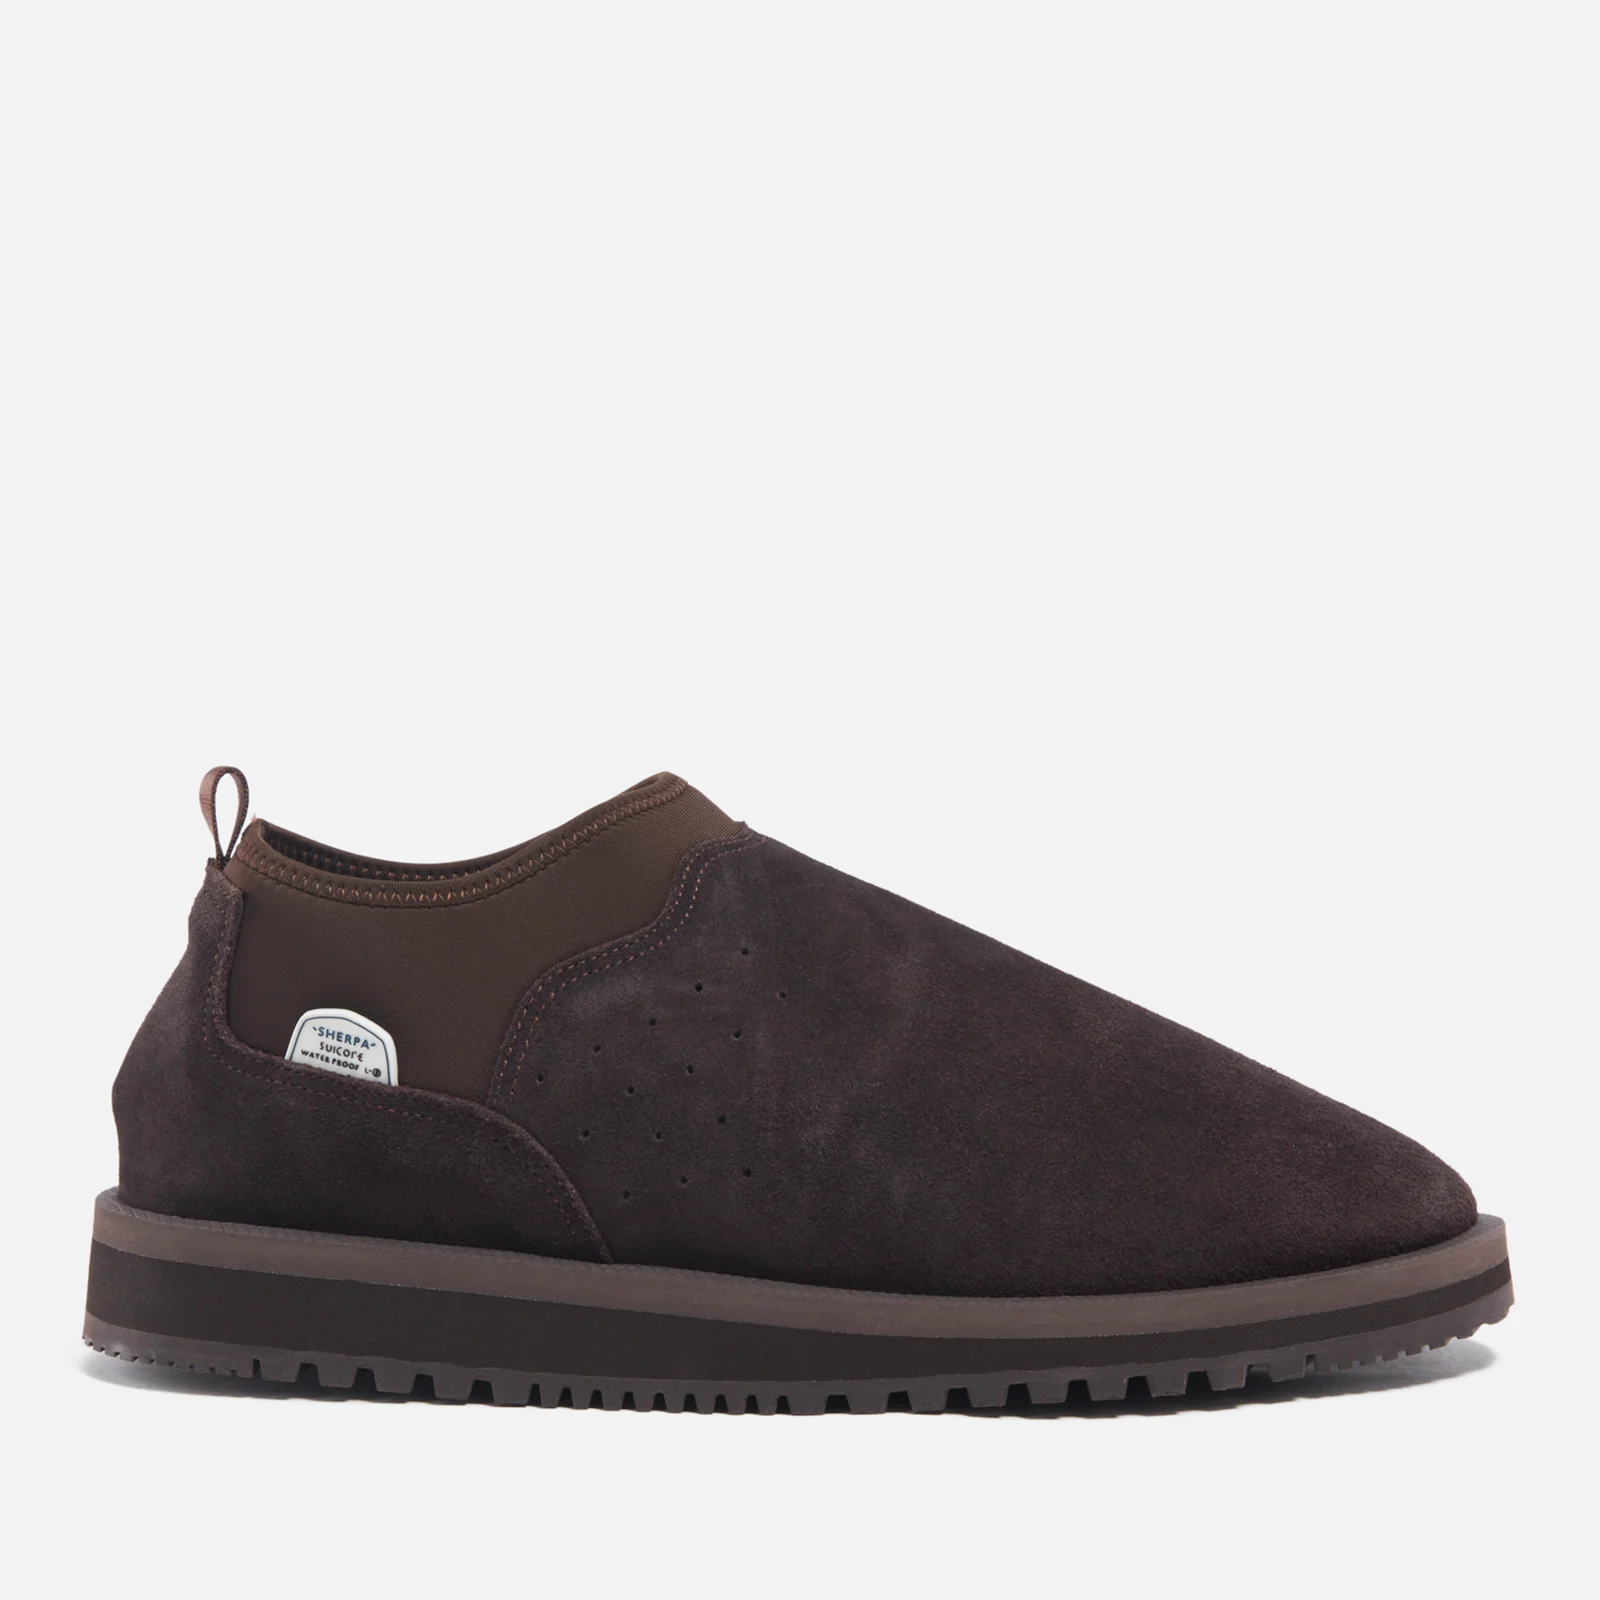 Suicoke Men's RON-M2ab-MID Suede and Jersey Boots - UK 7 Image 1